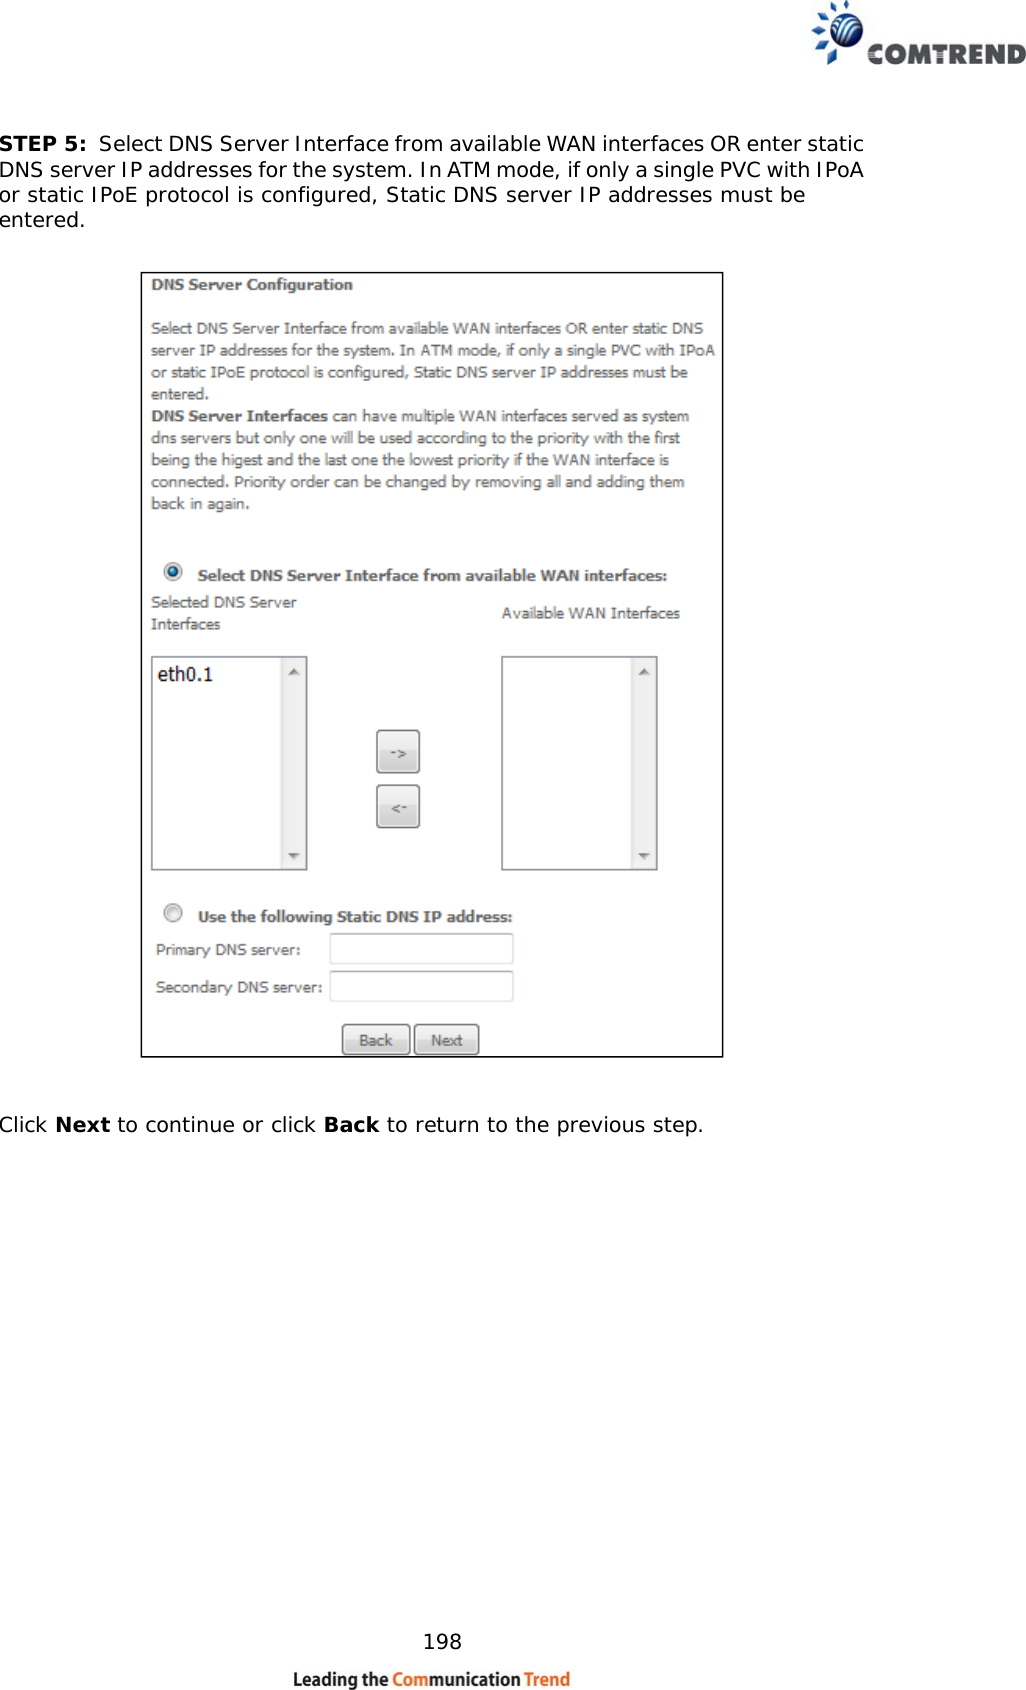    198 STEP 5:  Select DNS Server Interface from available WAN interfaces OR enter static DNS server IP addresses for the system. In ATM mode, if only a single PVC with IPoA or static IPoE protocol is configured, Static DNS server IP addresses must be entered.      Click Next to continue or click Back to return to the previous step.     